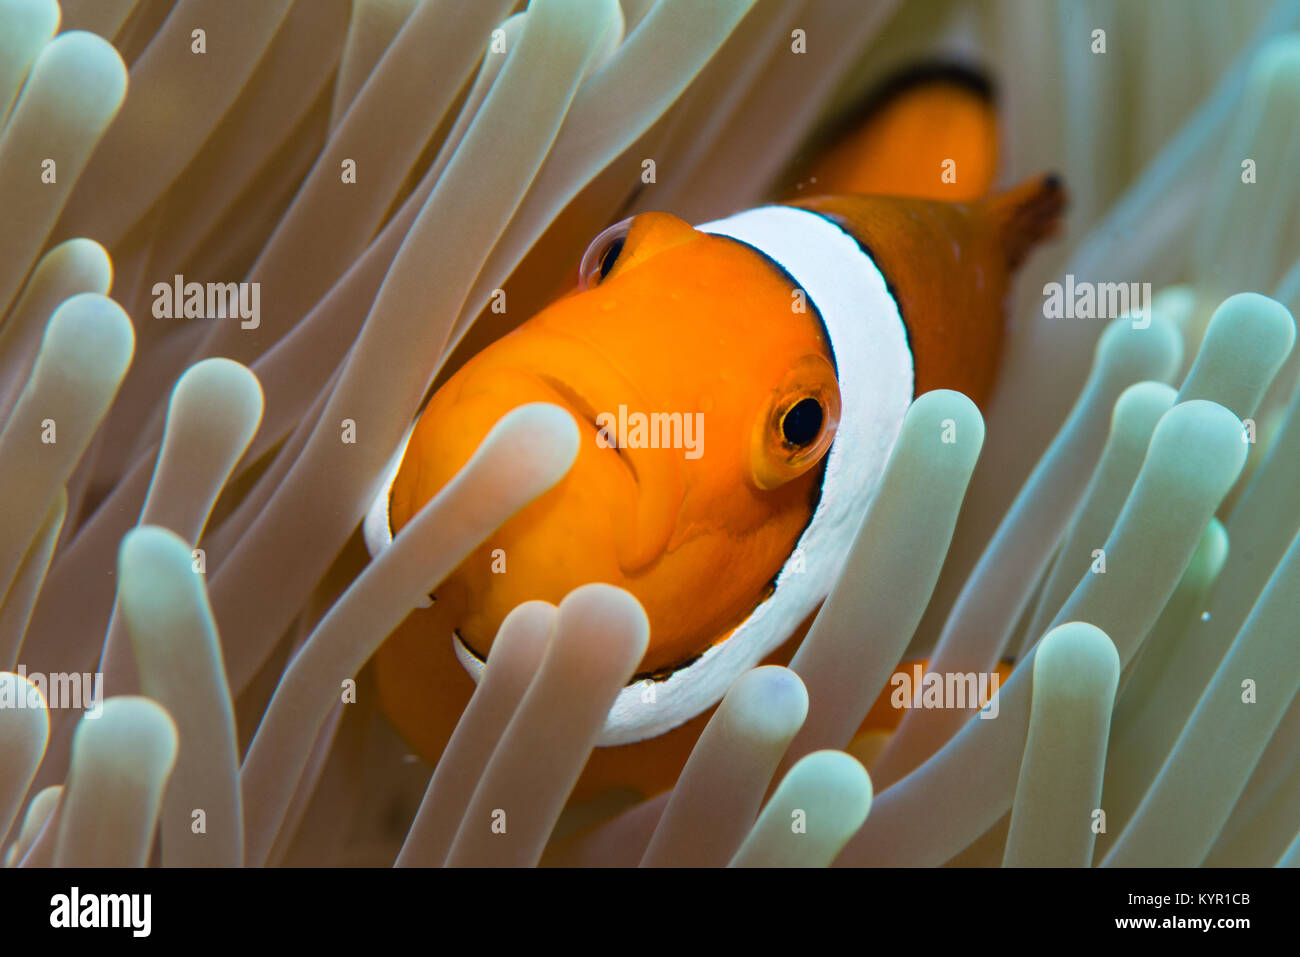 A close shot false clownfish, anemone fish in the anemone, showing the face and other eyes.  photographed in Komodo island national park, indonesia Stock Photo